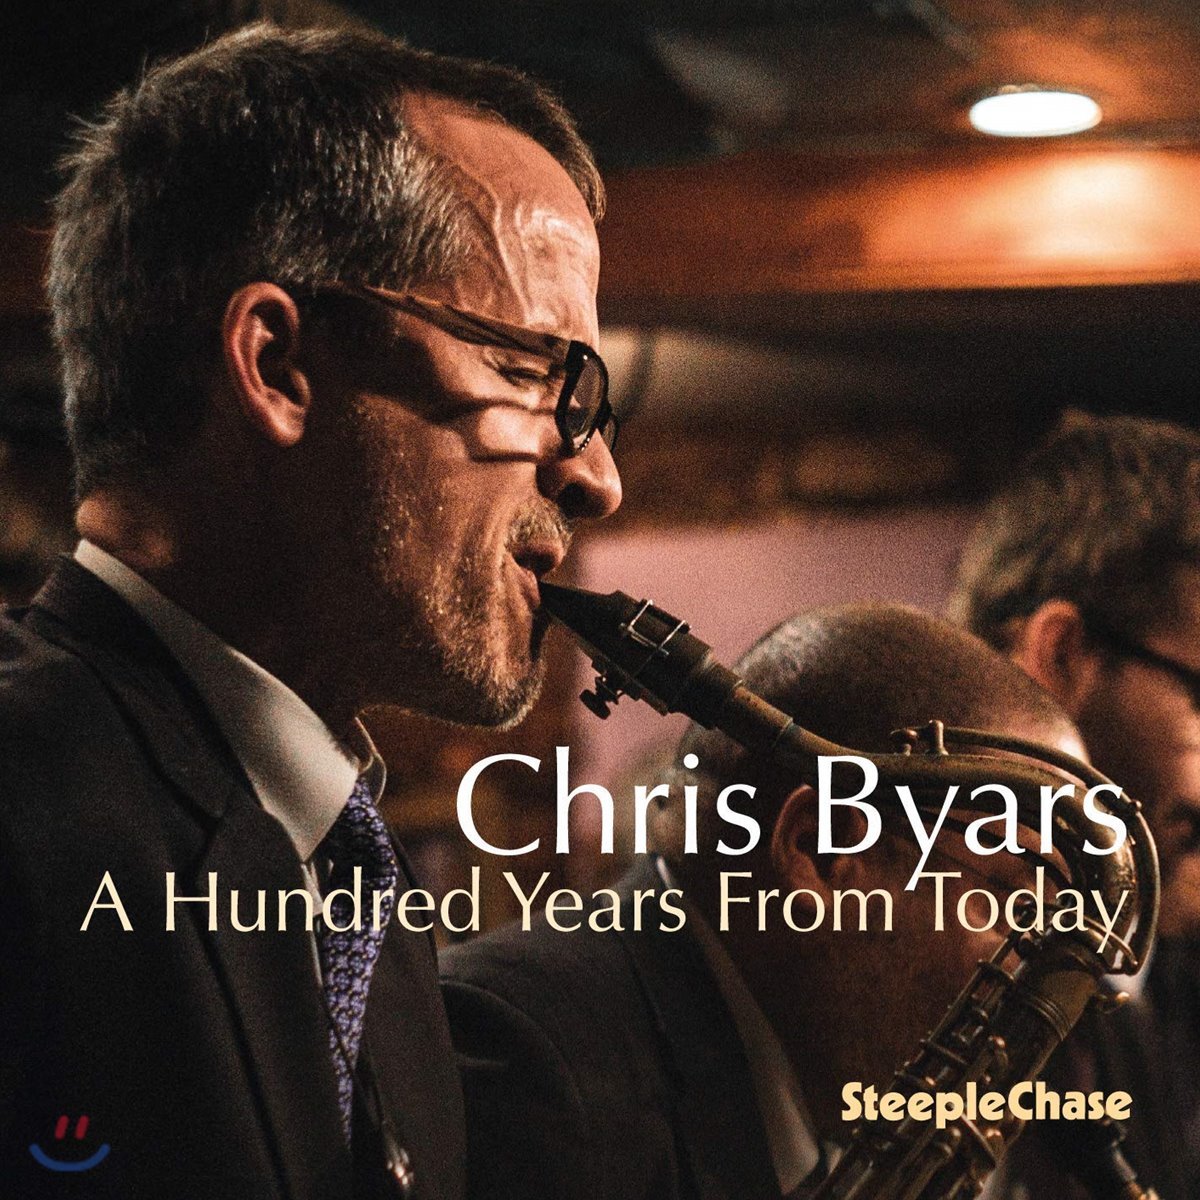 Chris Byars (크리스 바이어스) - A Hundred Years from Today